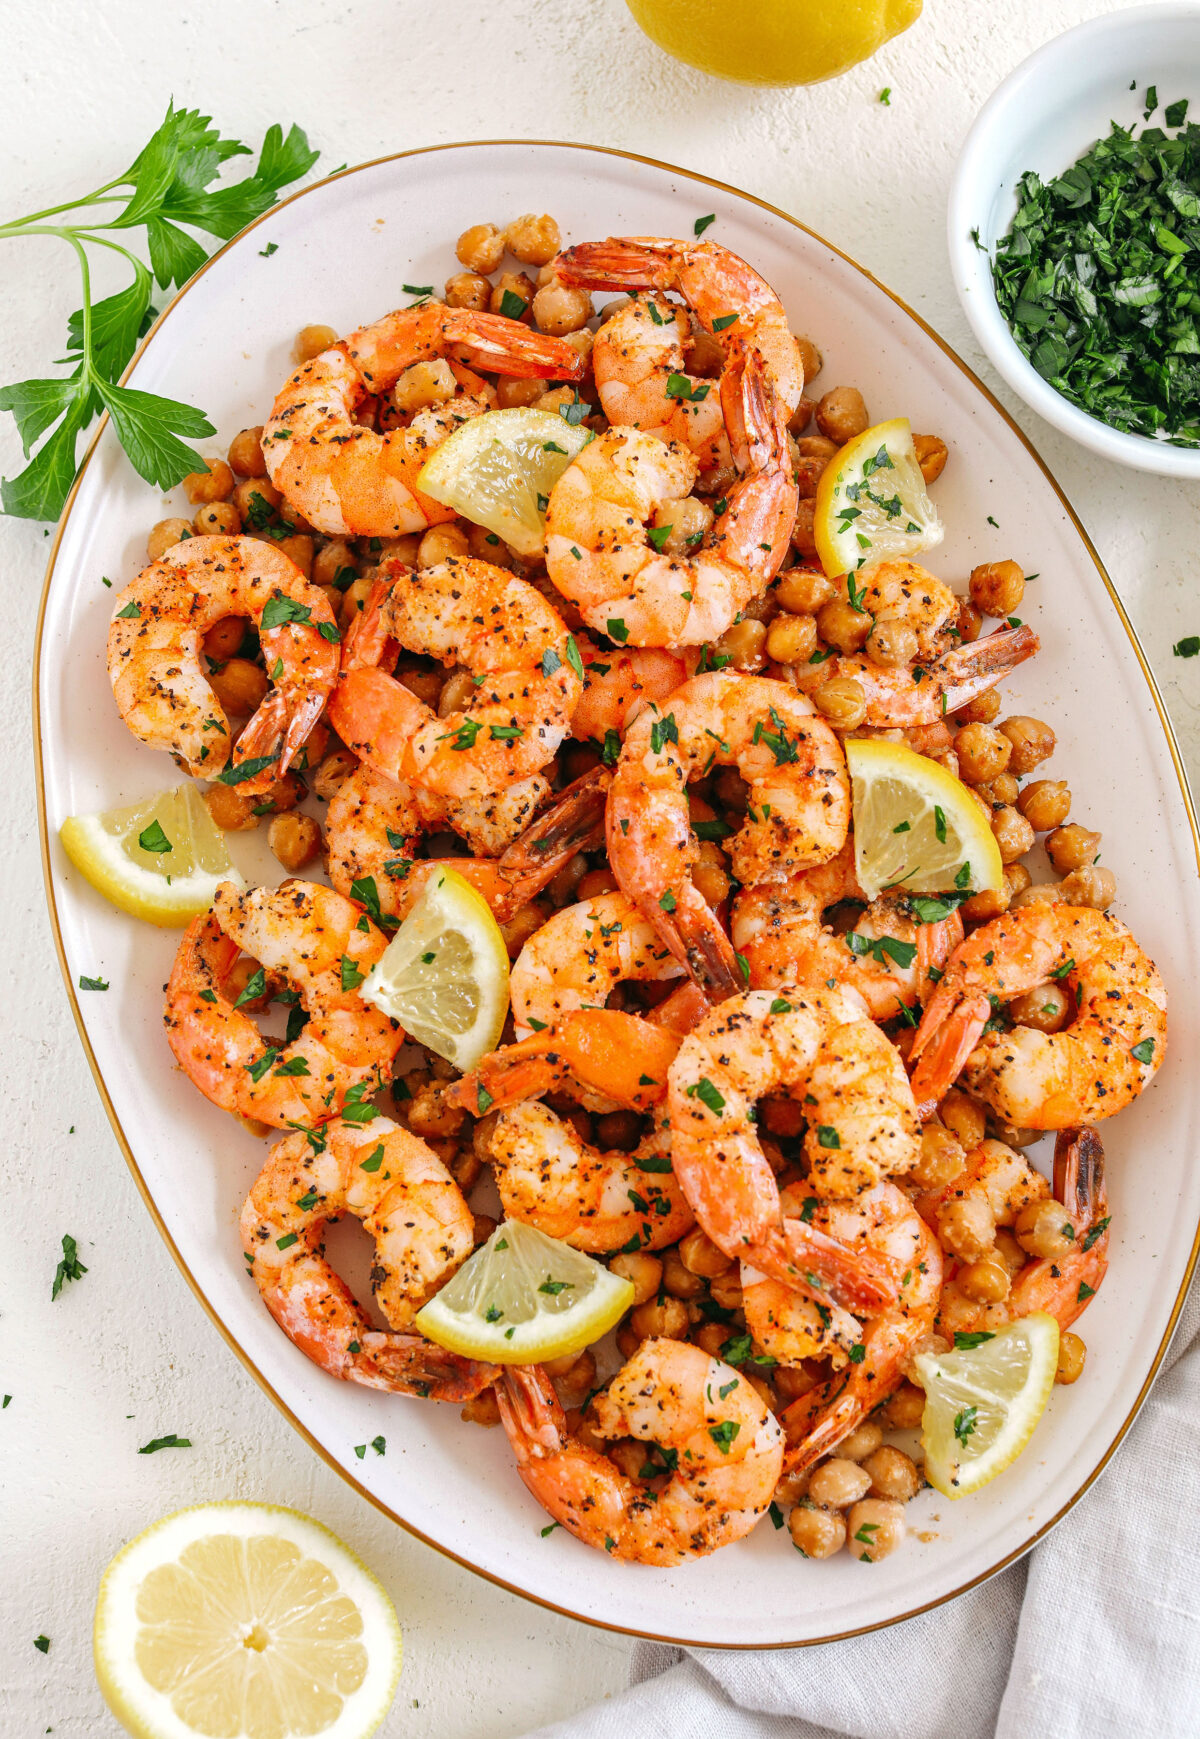 Flavorful Lemon Garlic Shrimp with Chickpeas easily made in under 30 minutes all on one pan with just a few simple ingredients!  Perfect as an appetizer, on top of a salad or even as a main dish!